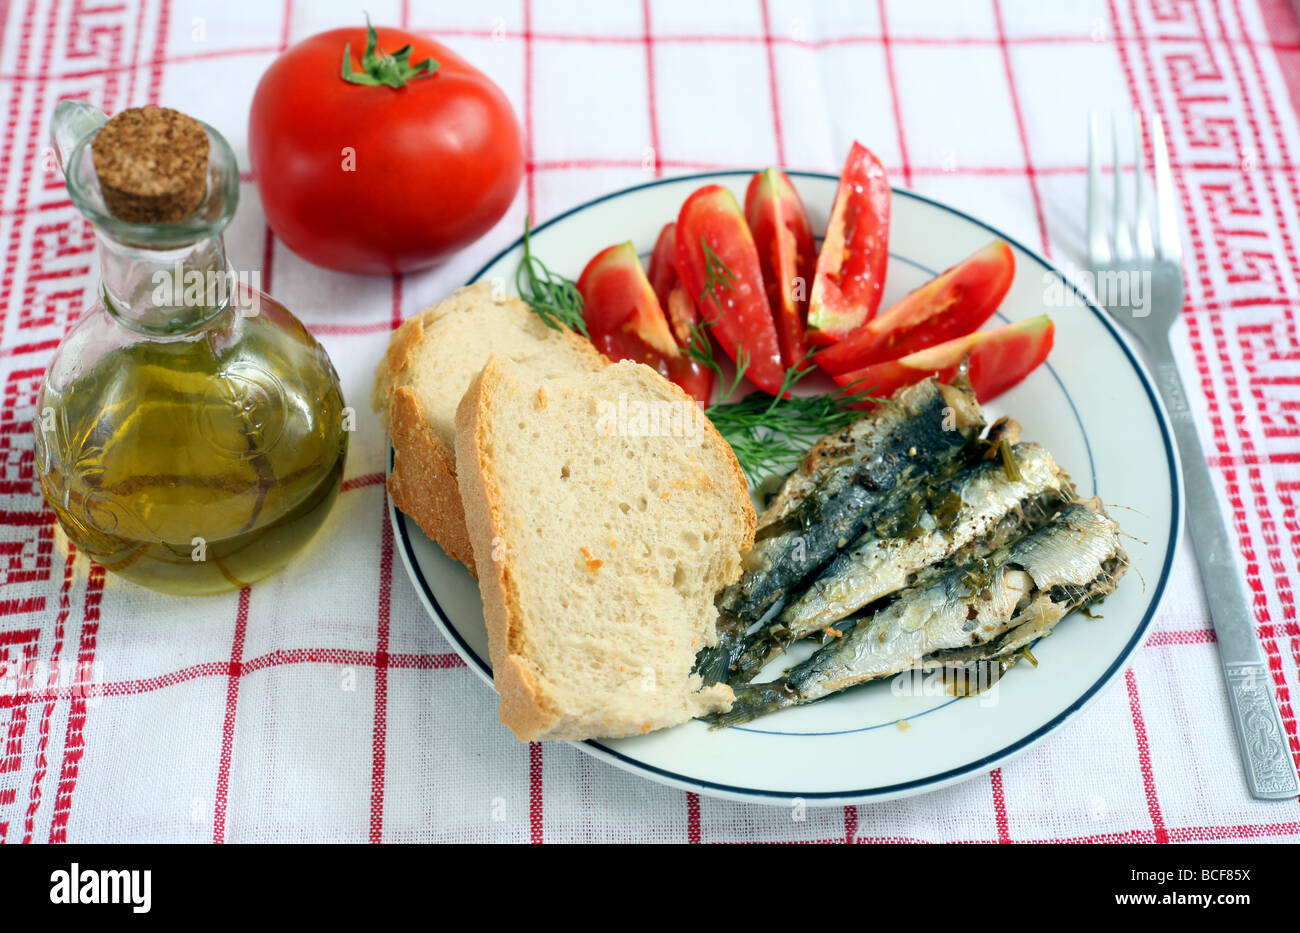 A healthy Mediterranean-style meal of baked sardines with bread, tomatoes and olive oil Stock Photo